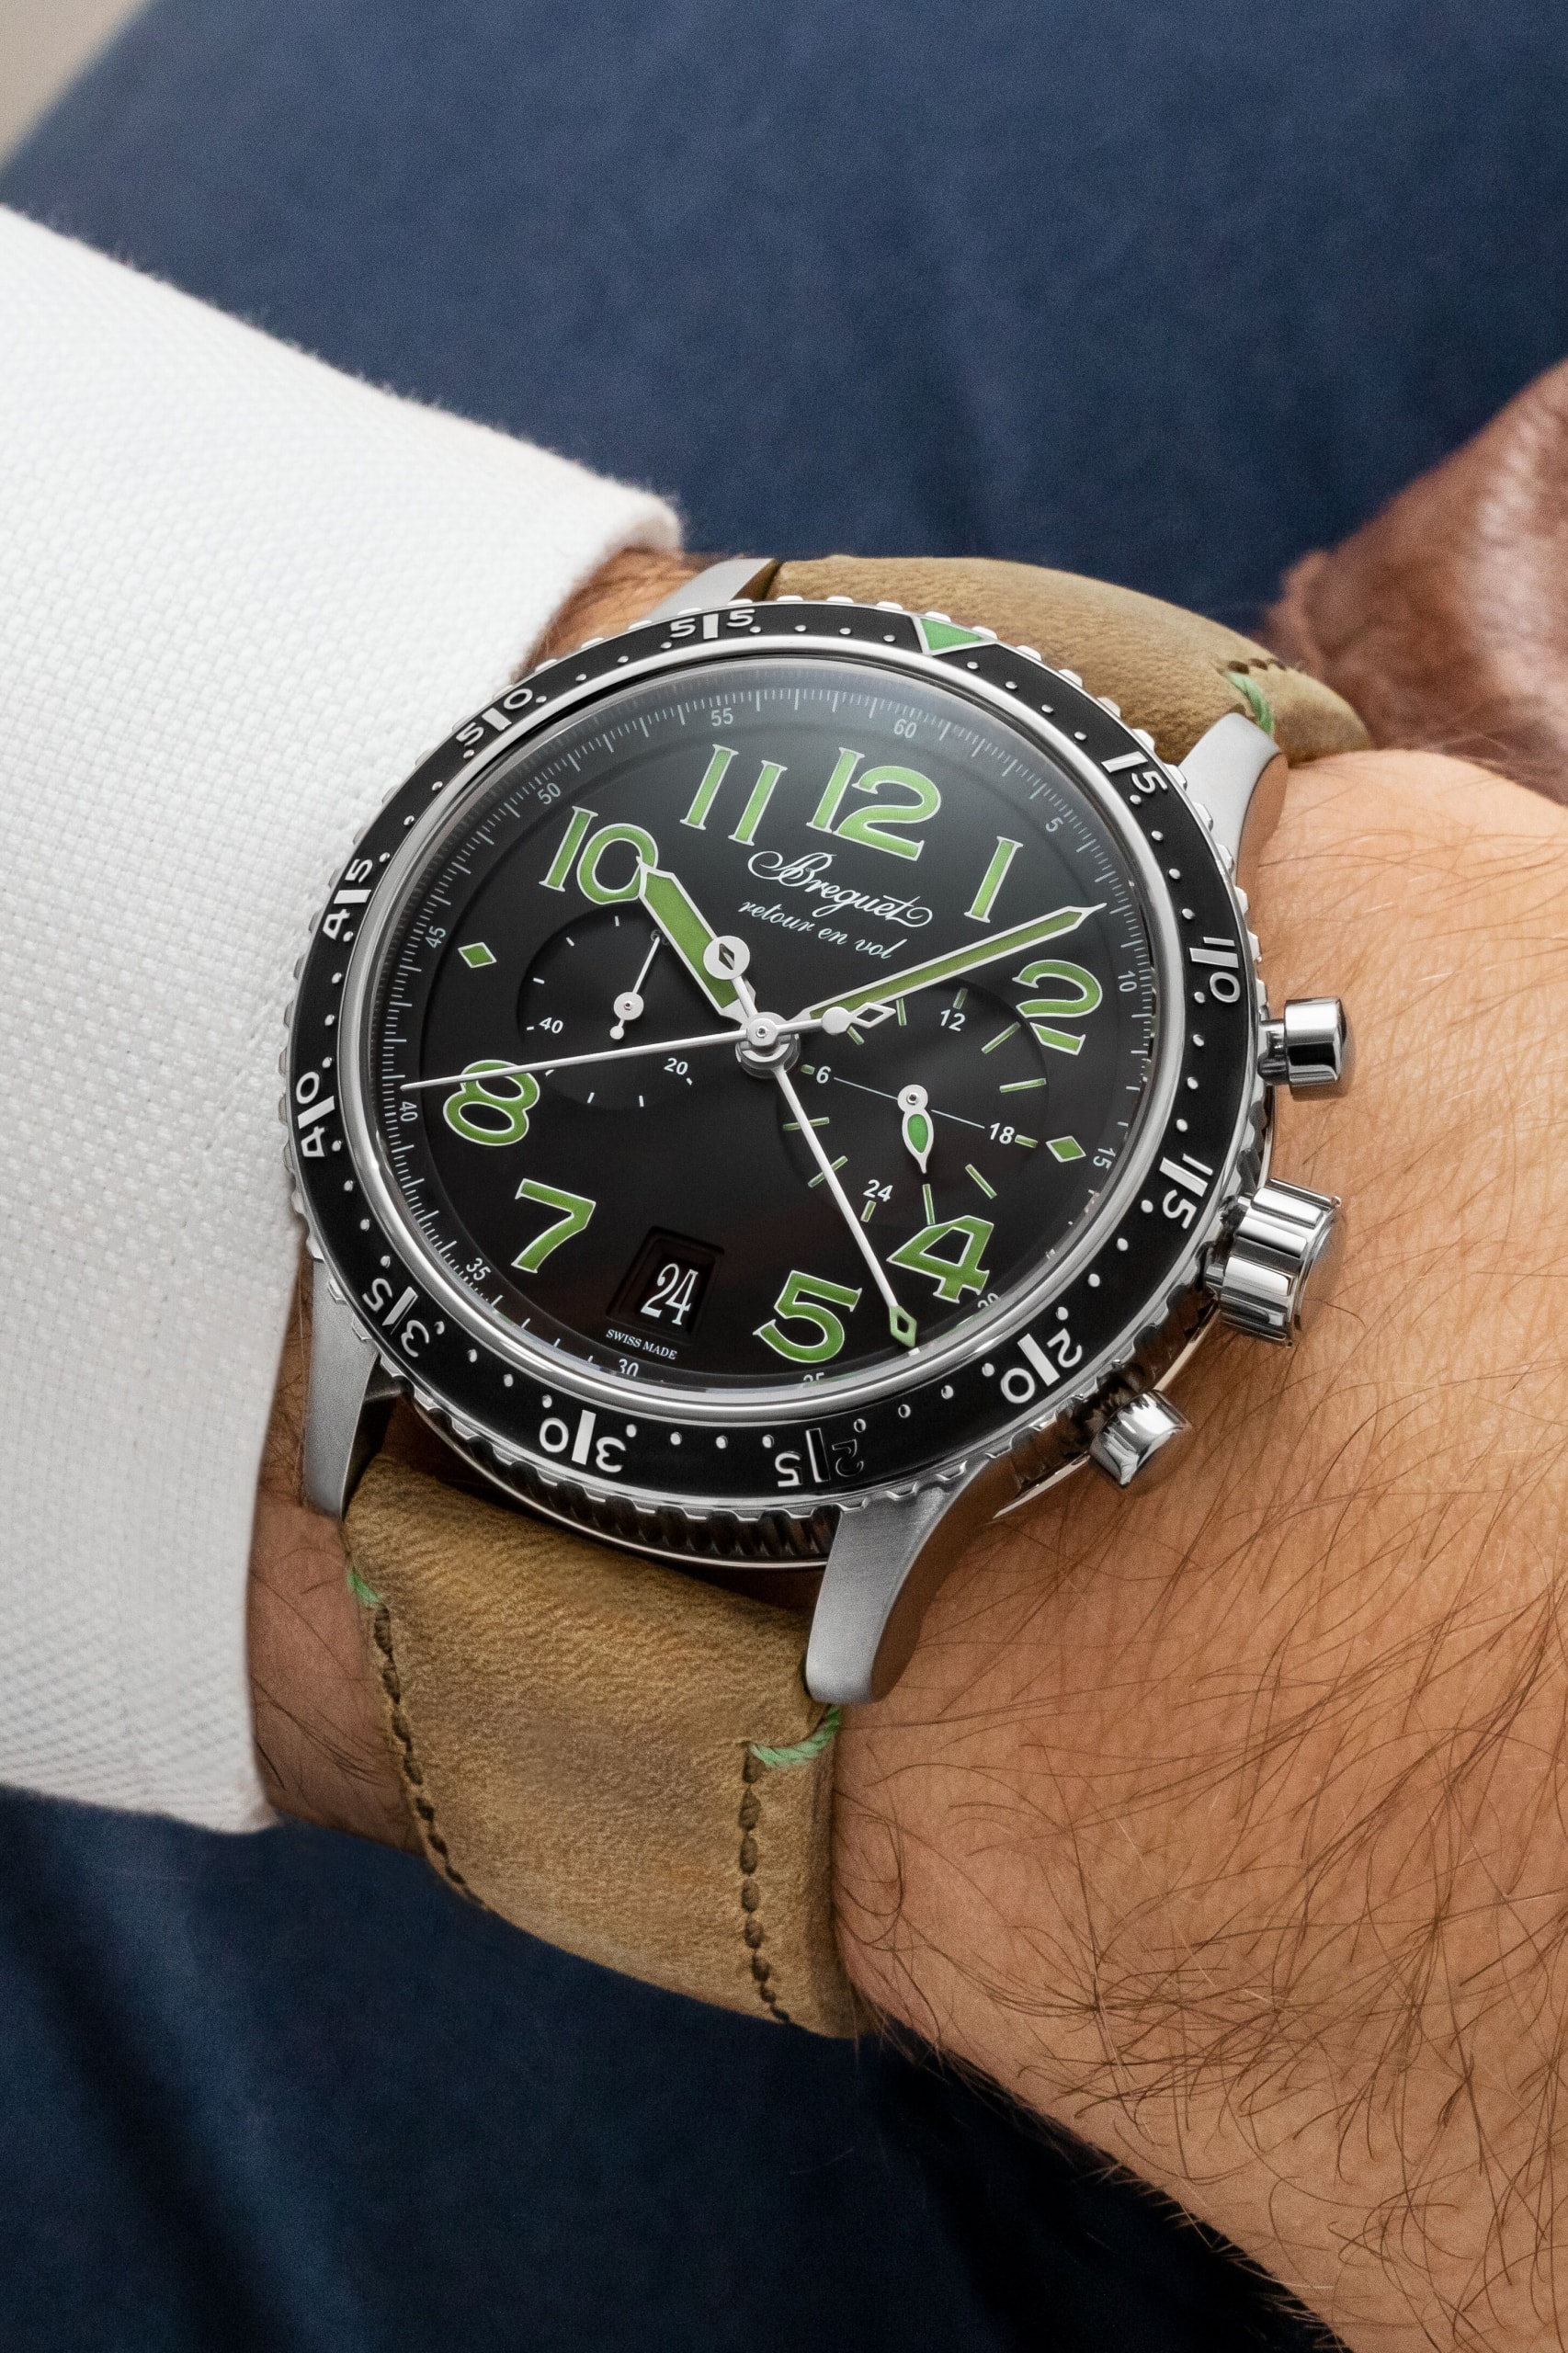 Breguet Brings a Splash of Color To its Vintage Military Chronograph